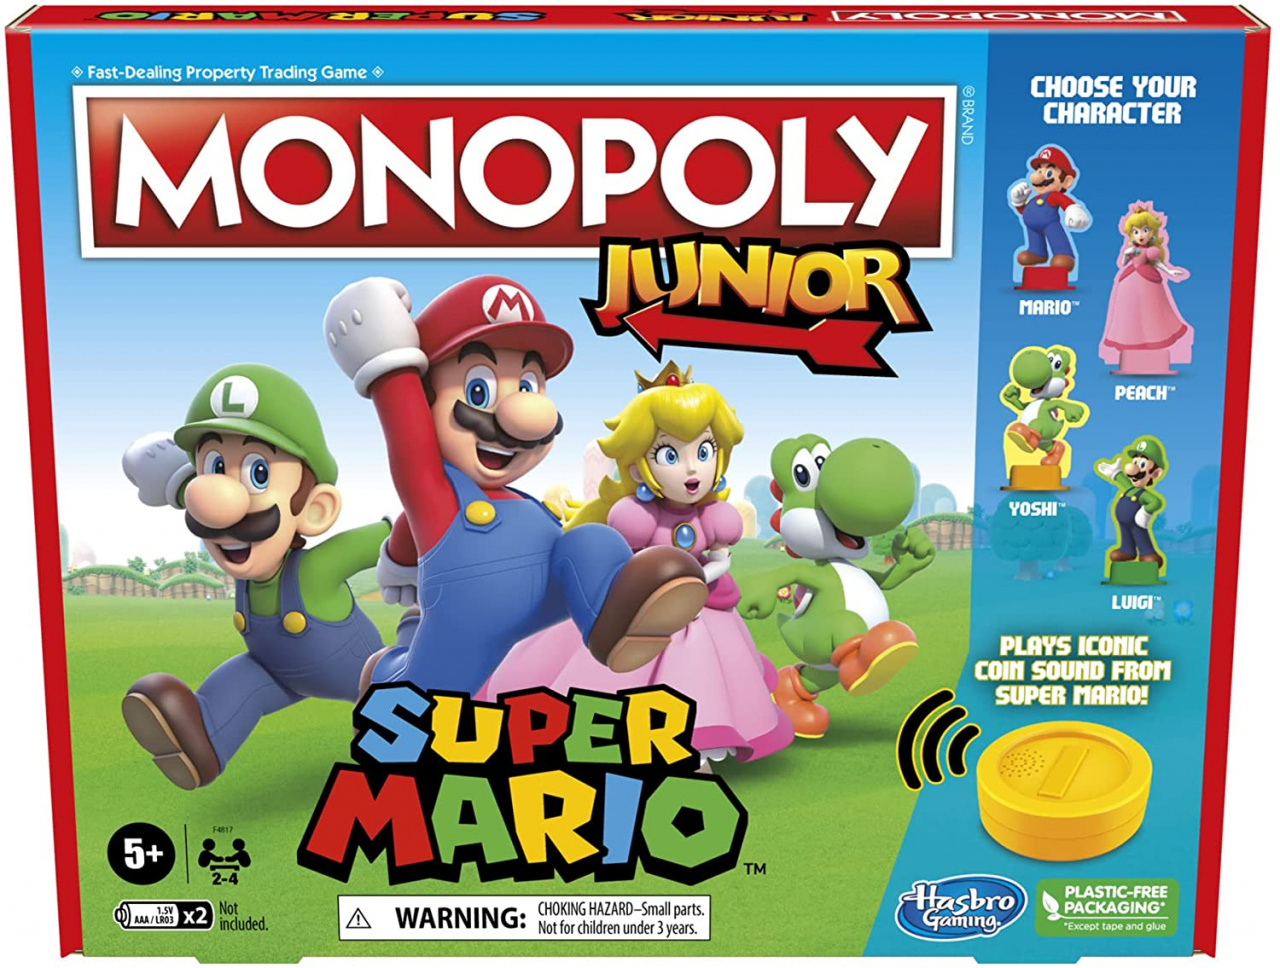 CLEARANCE BARGAINS JUNIOR MONOPOLY REGIONAL MONOPOLY SPECIAL EDITION BOARD 